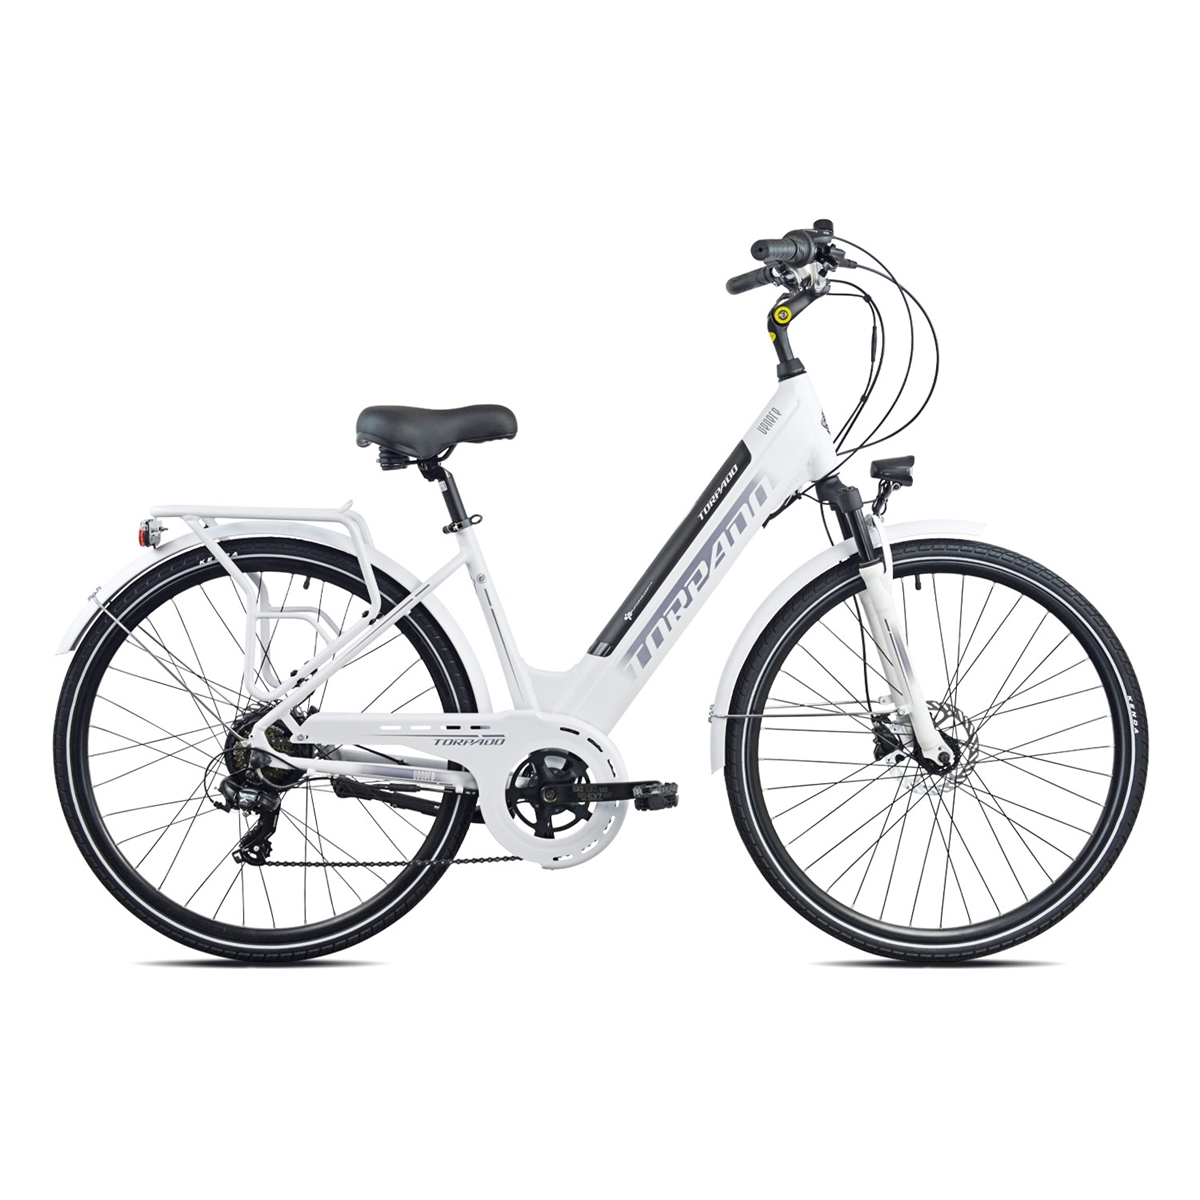 Venere T268 28'' 7s 468Wh Bafang White One Size